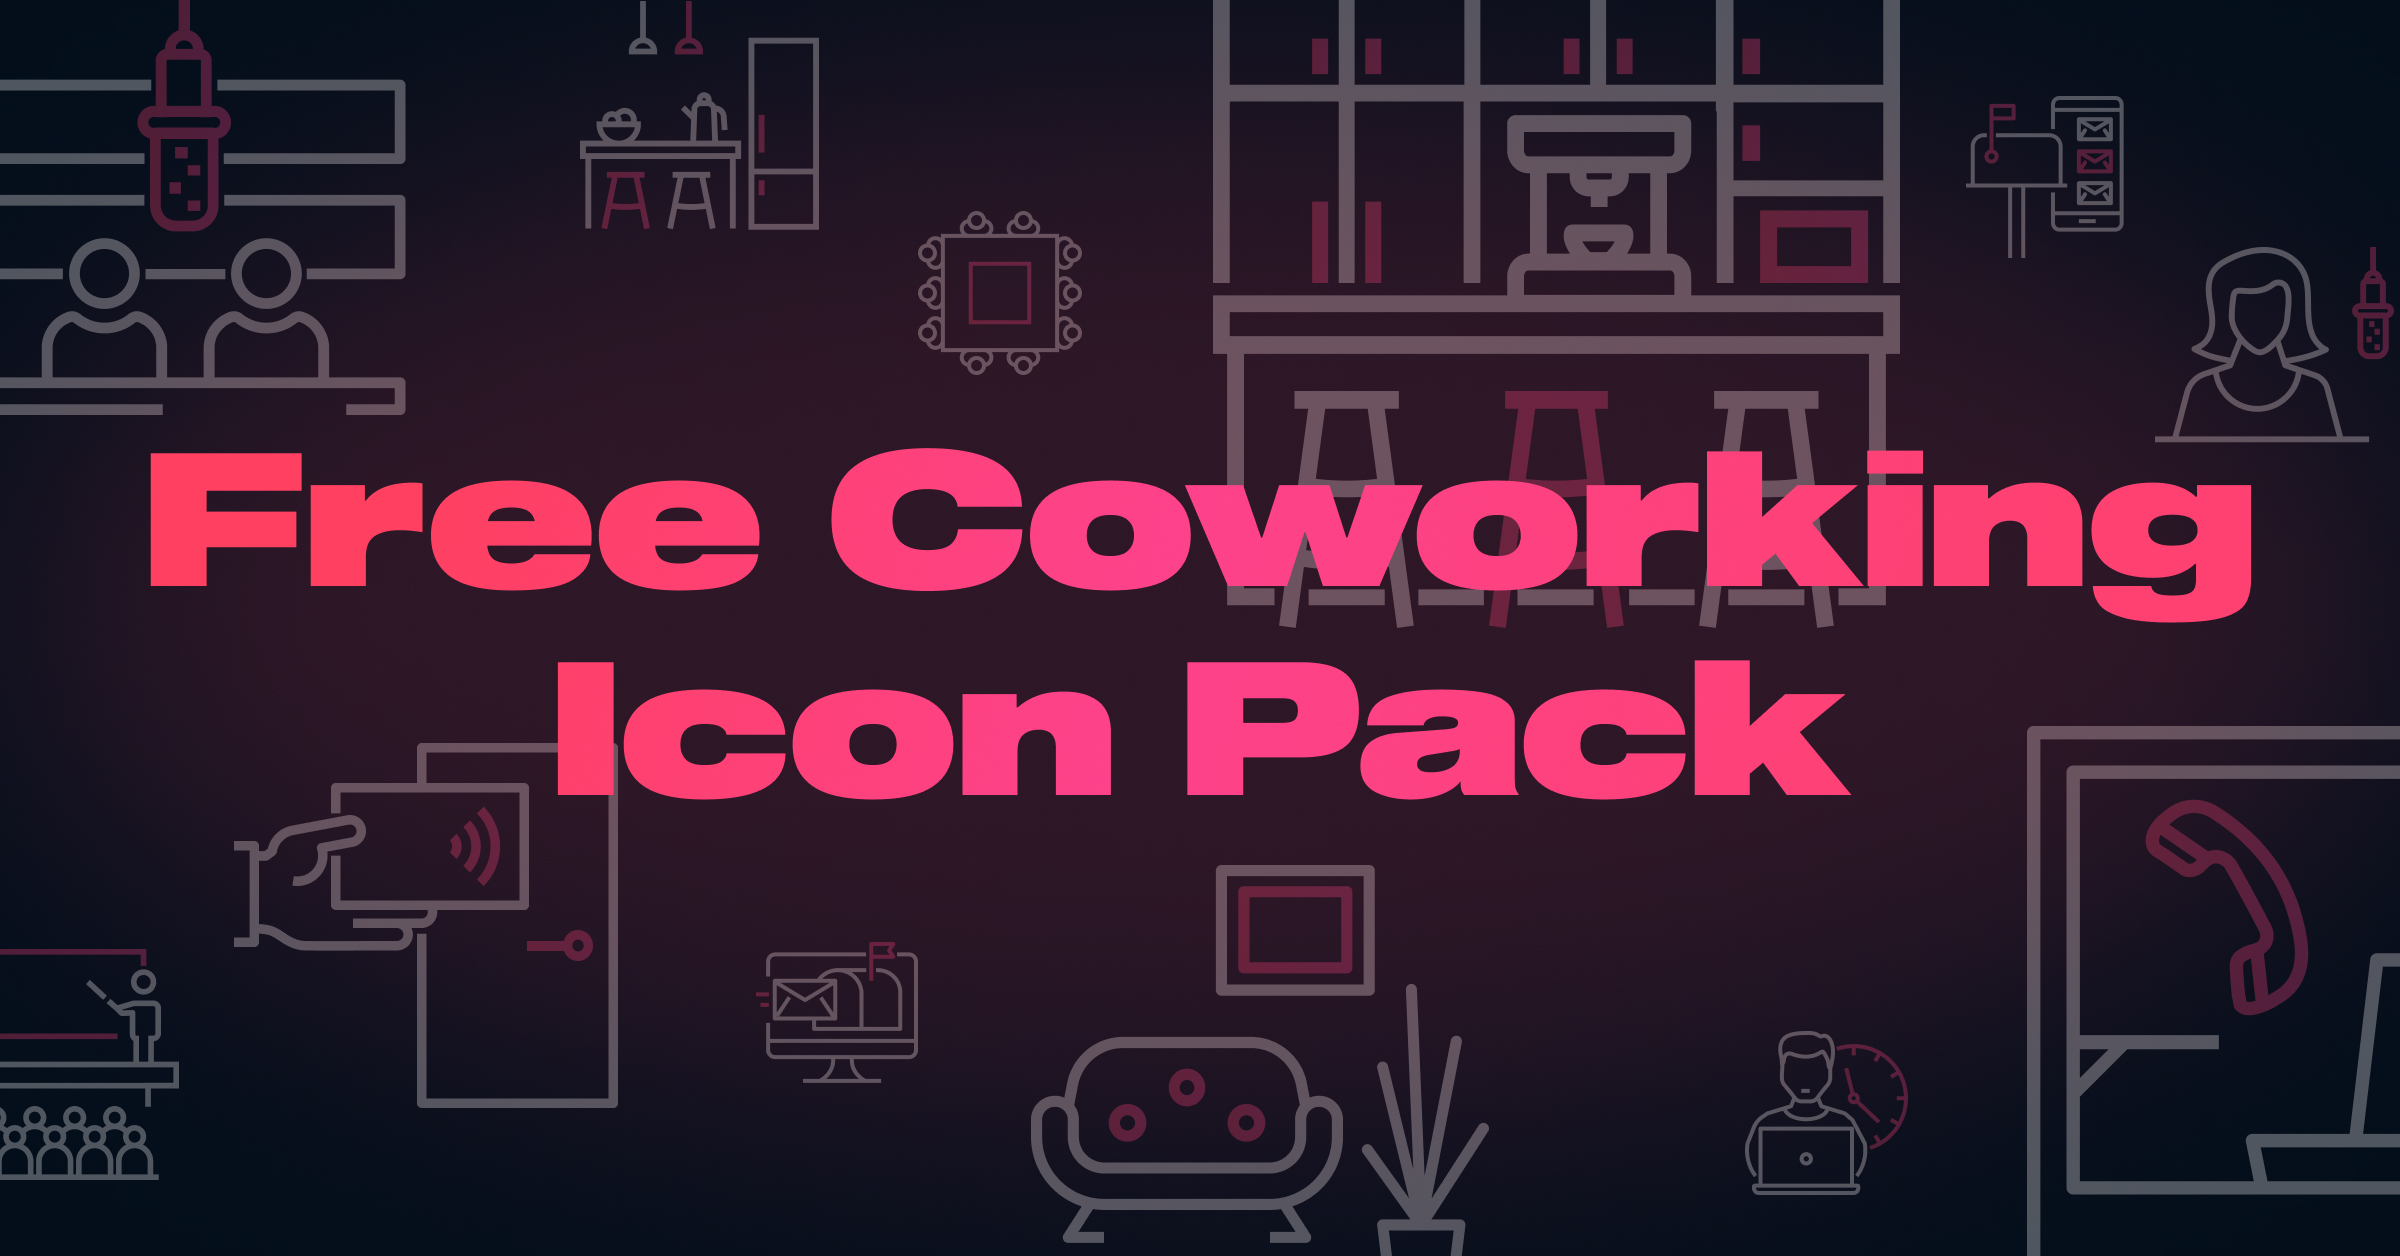 Free Download: Improve Your Website Functionality with Our Free Coworking Icon Pack